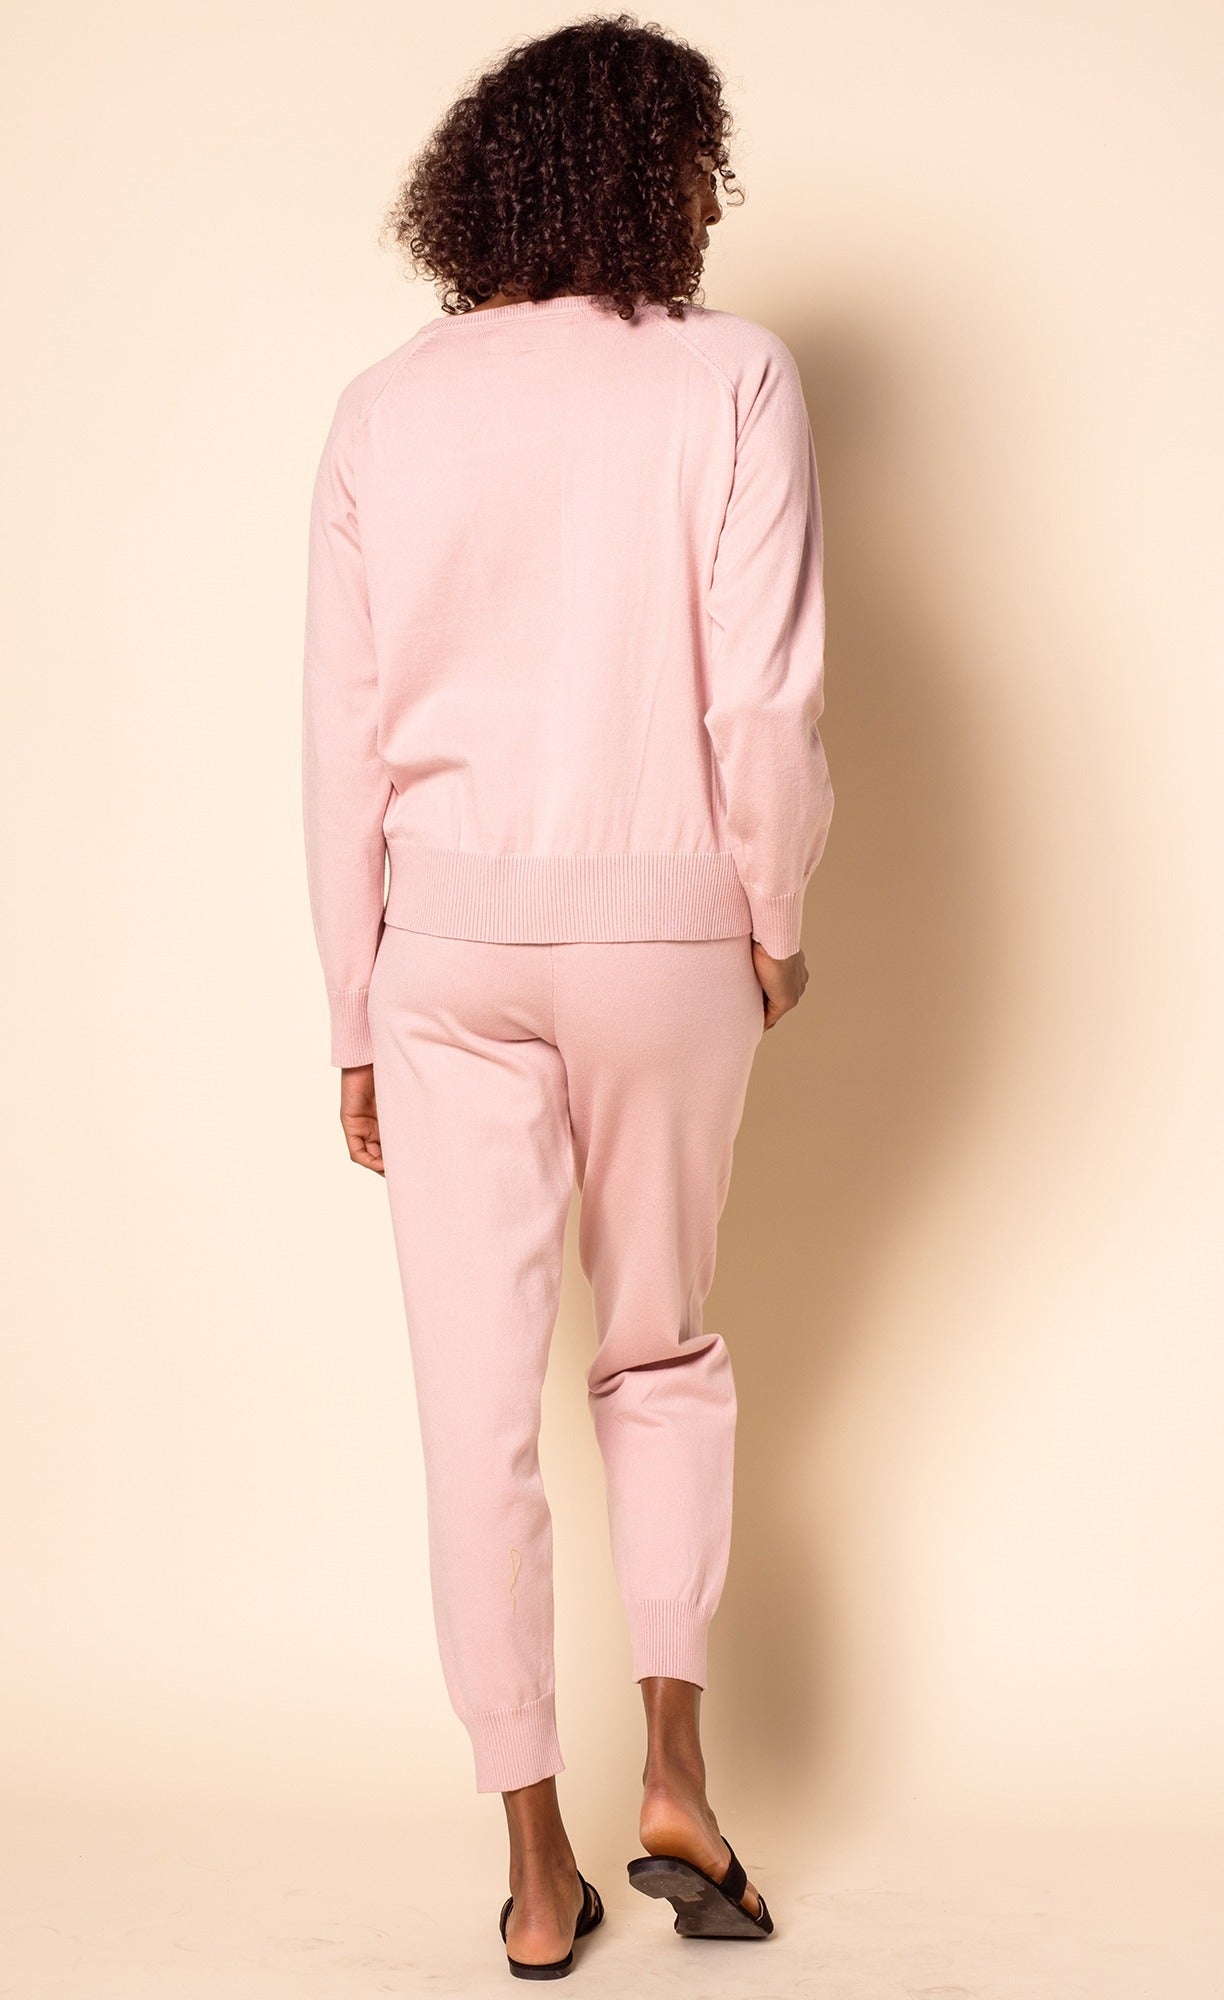 The Kye Top Pink - Pink Martini Collection